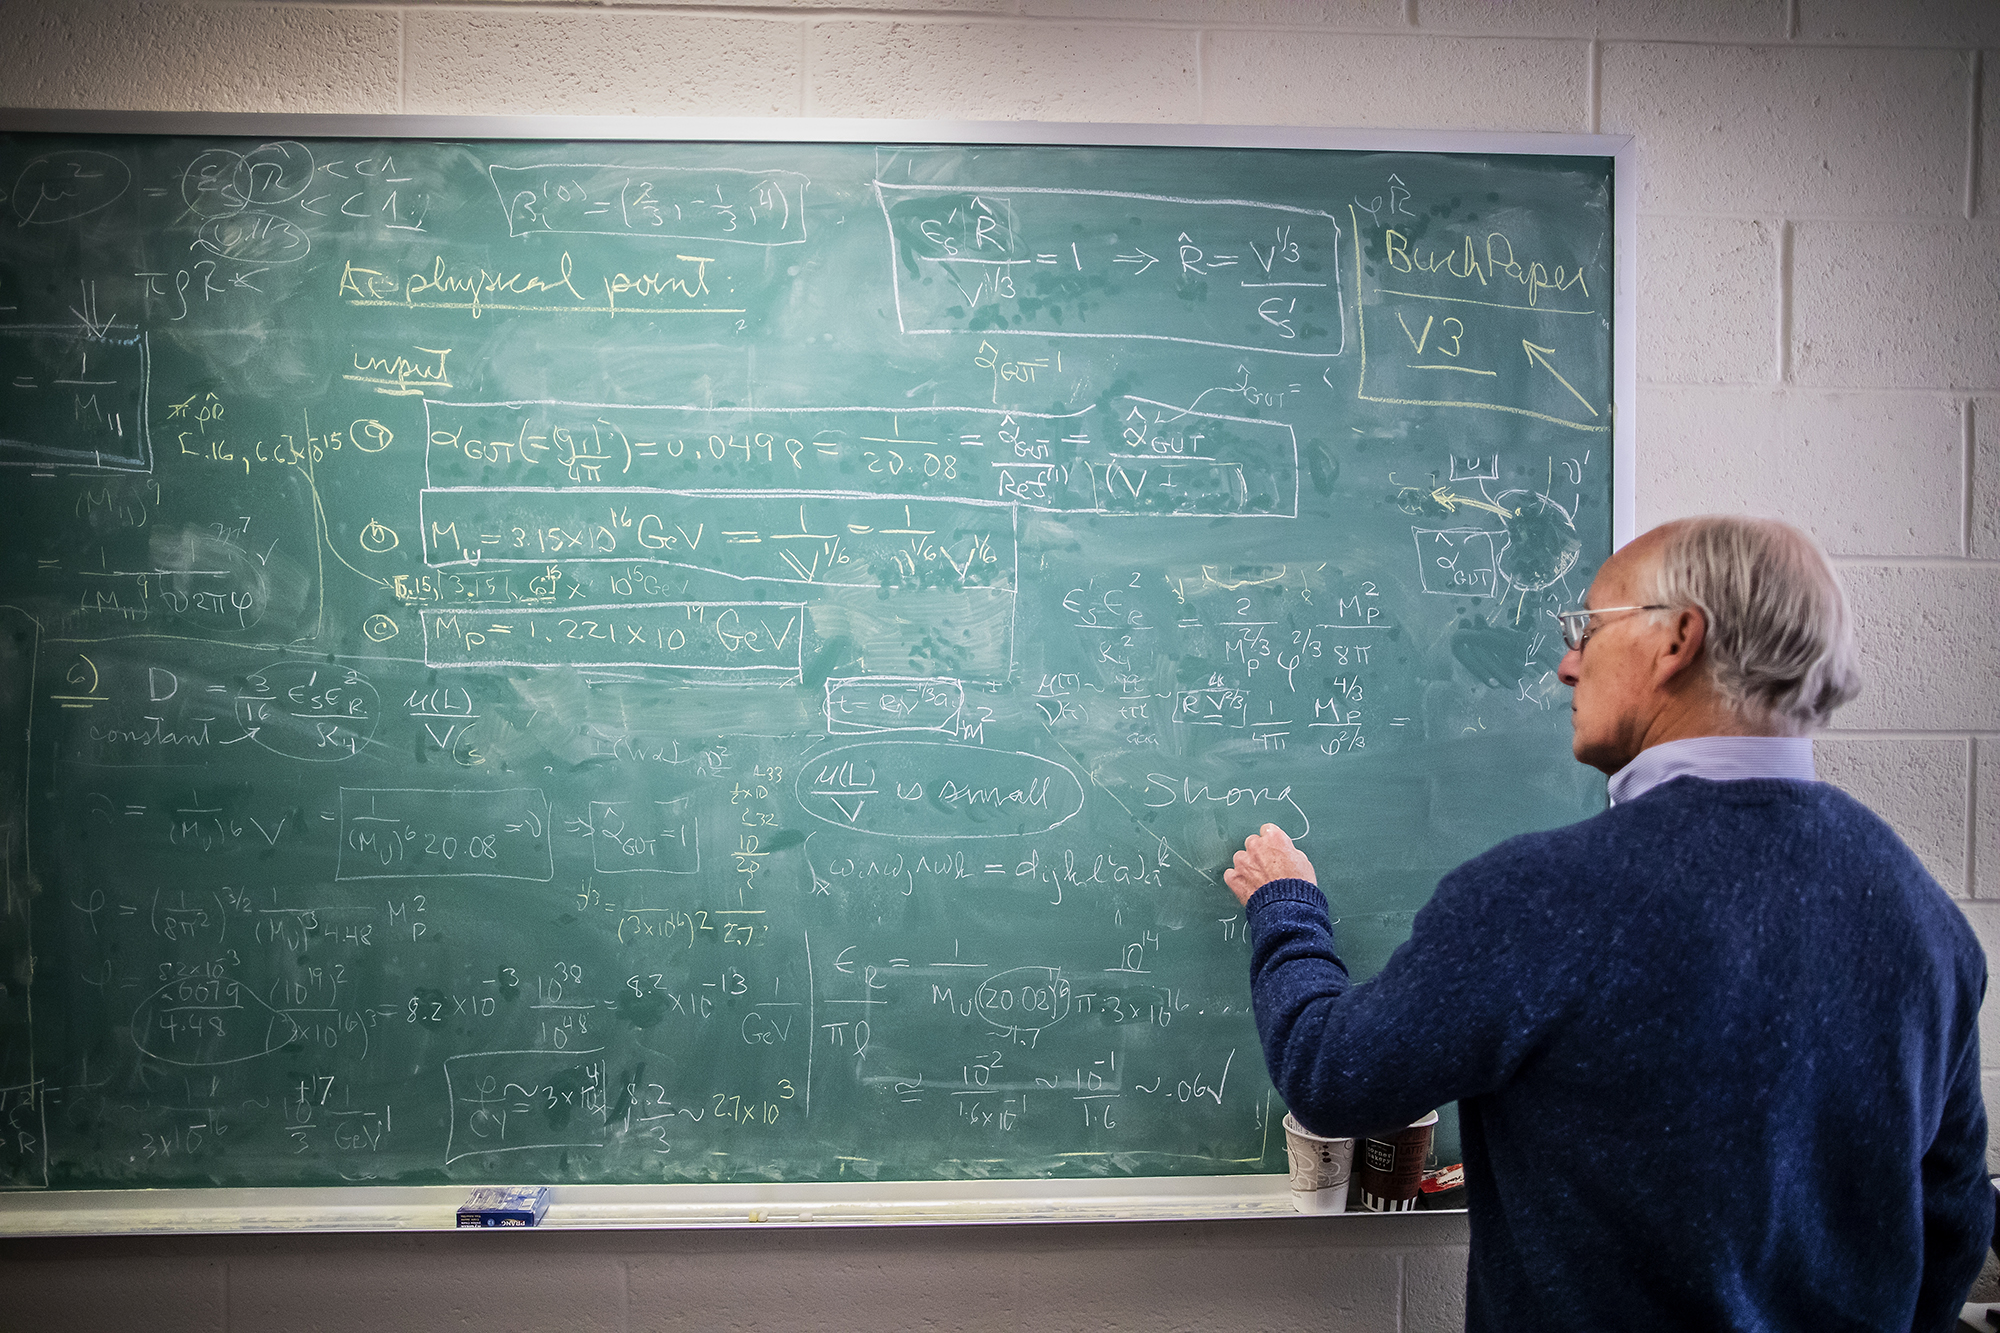 a person working on math equations at a chalkboard